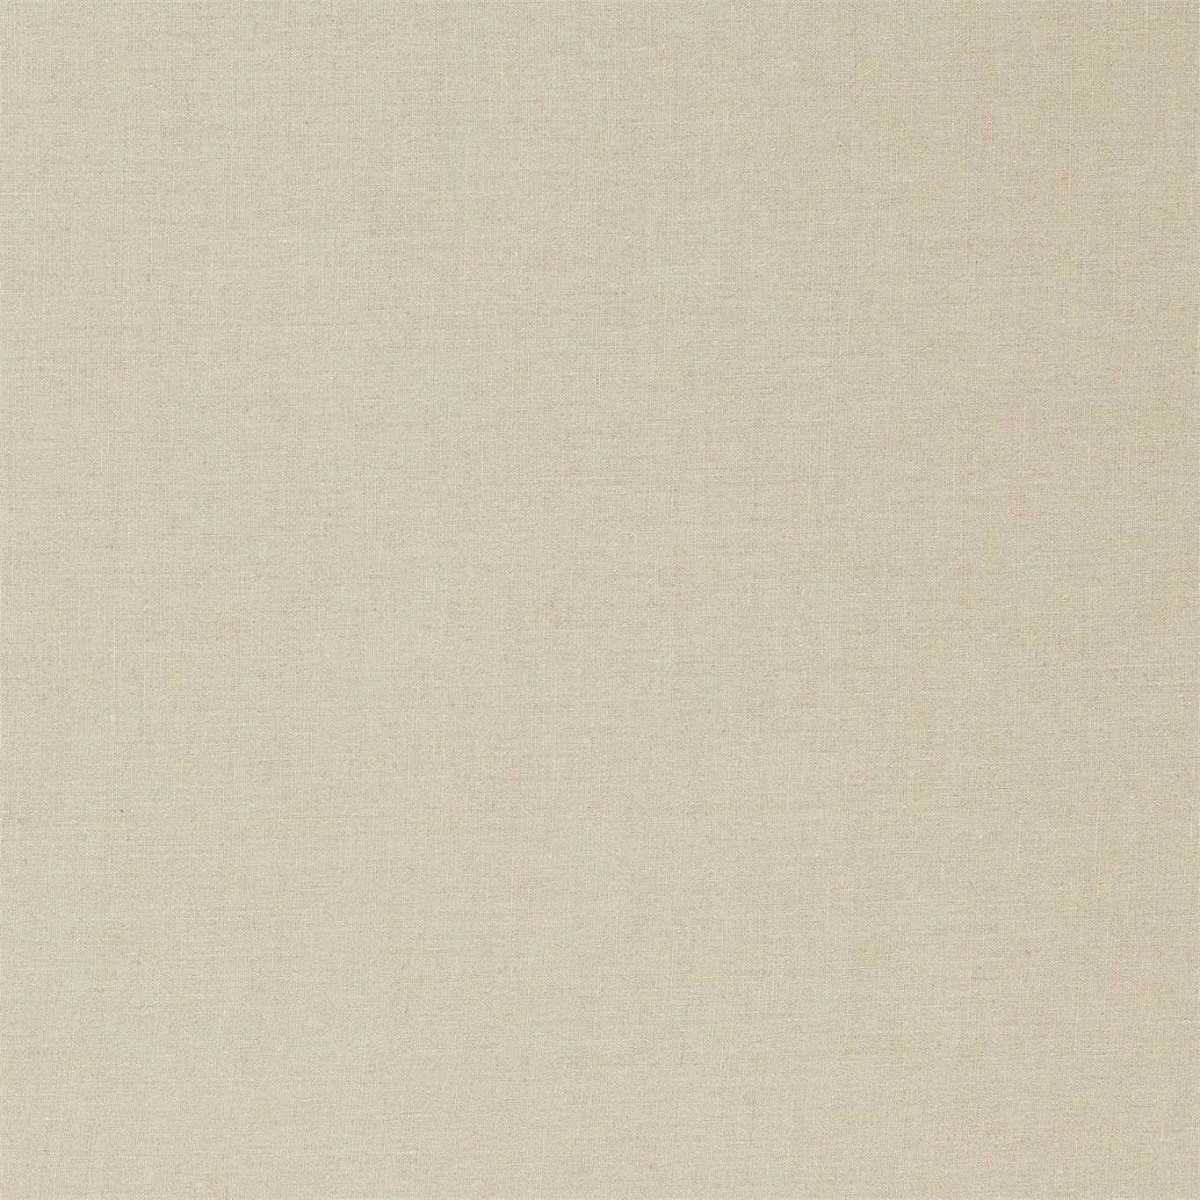 Lustre Pale Linen Fabric by Zoffany